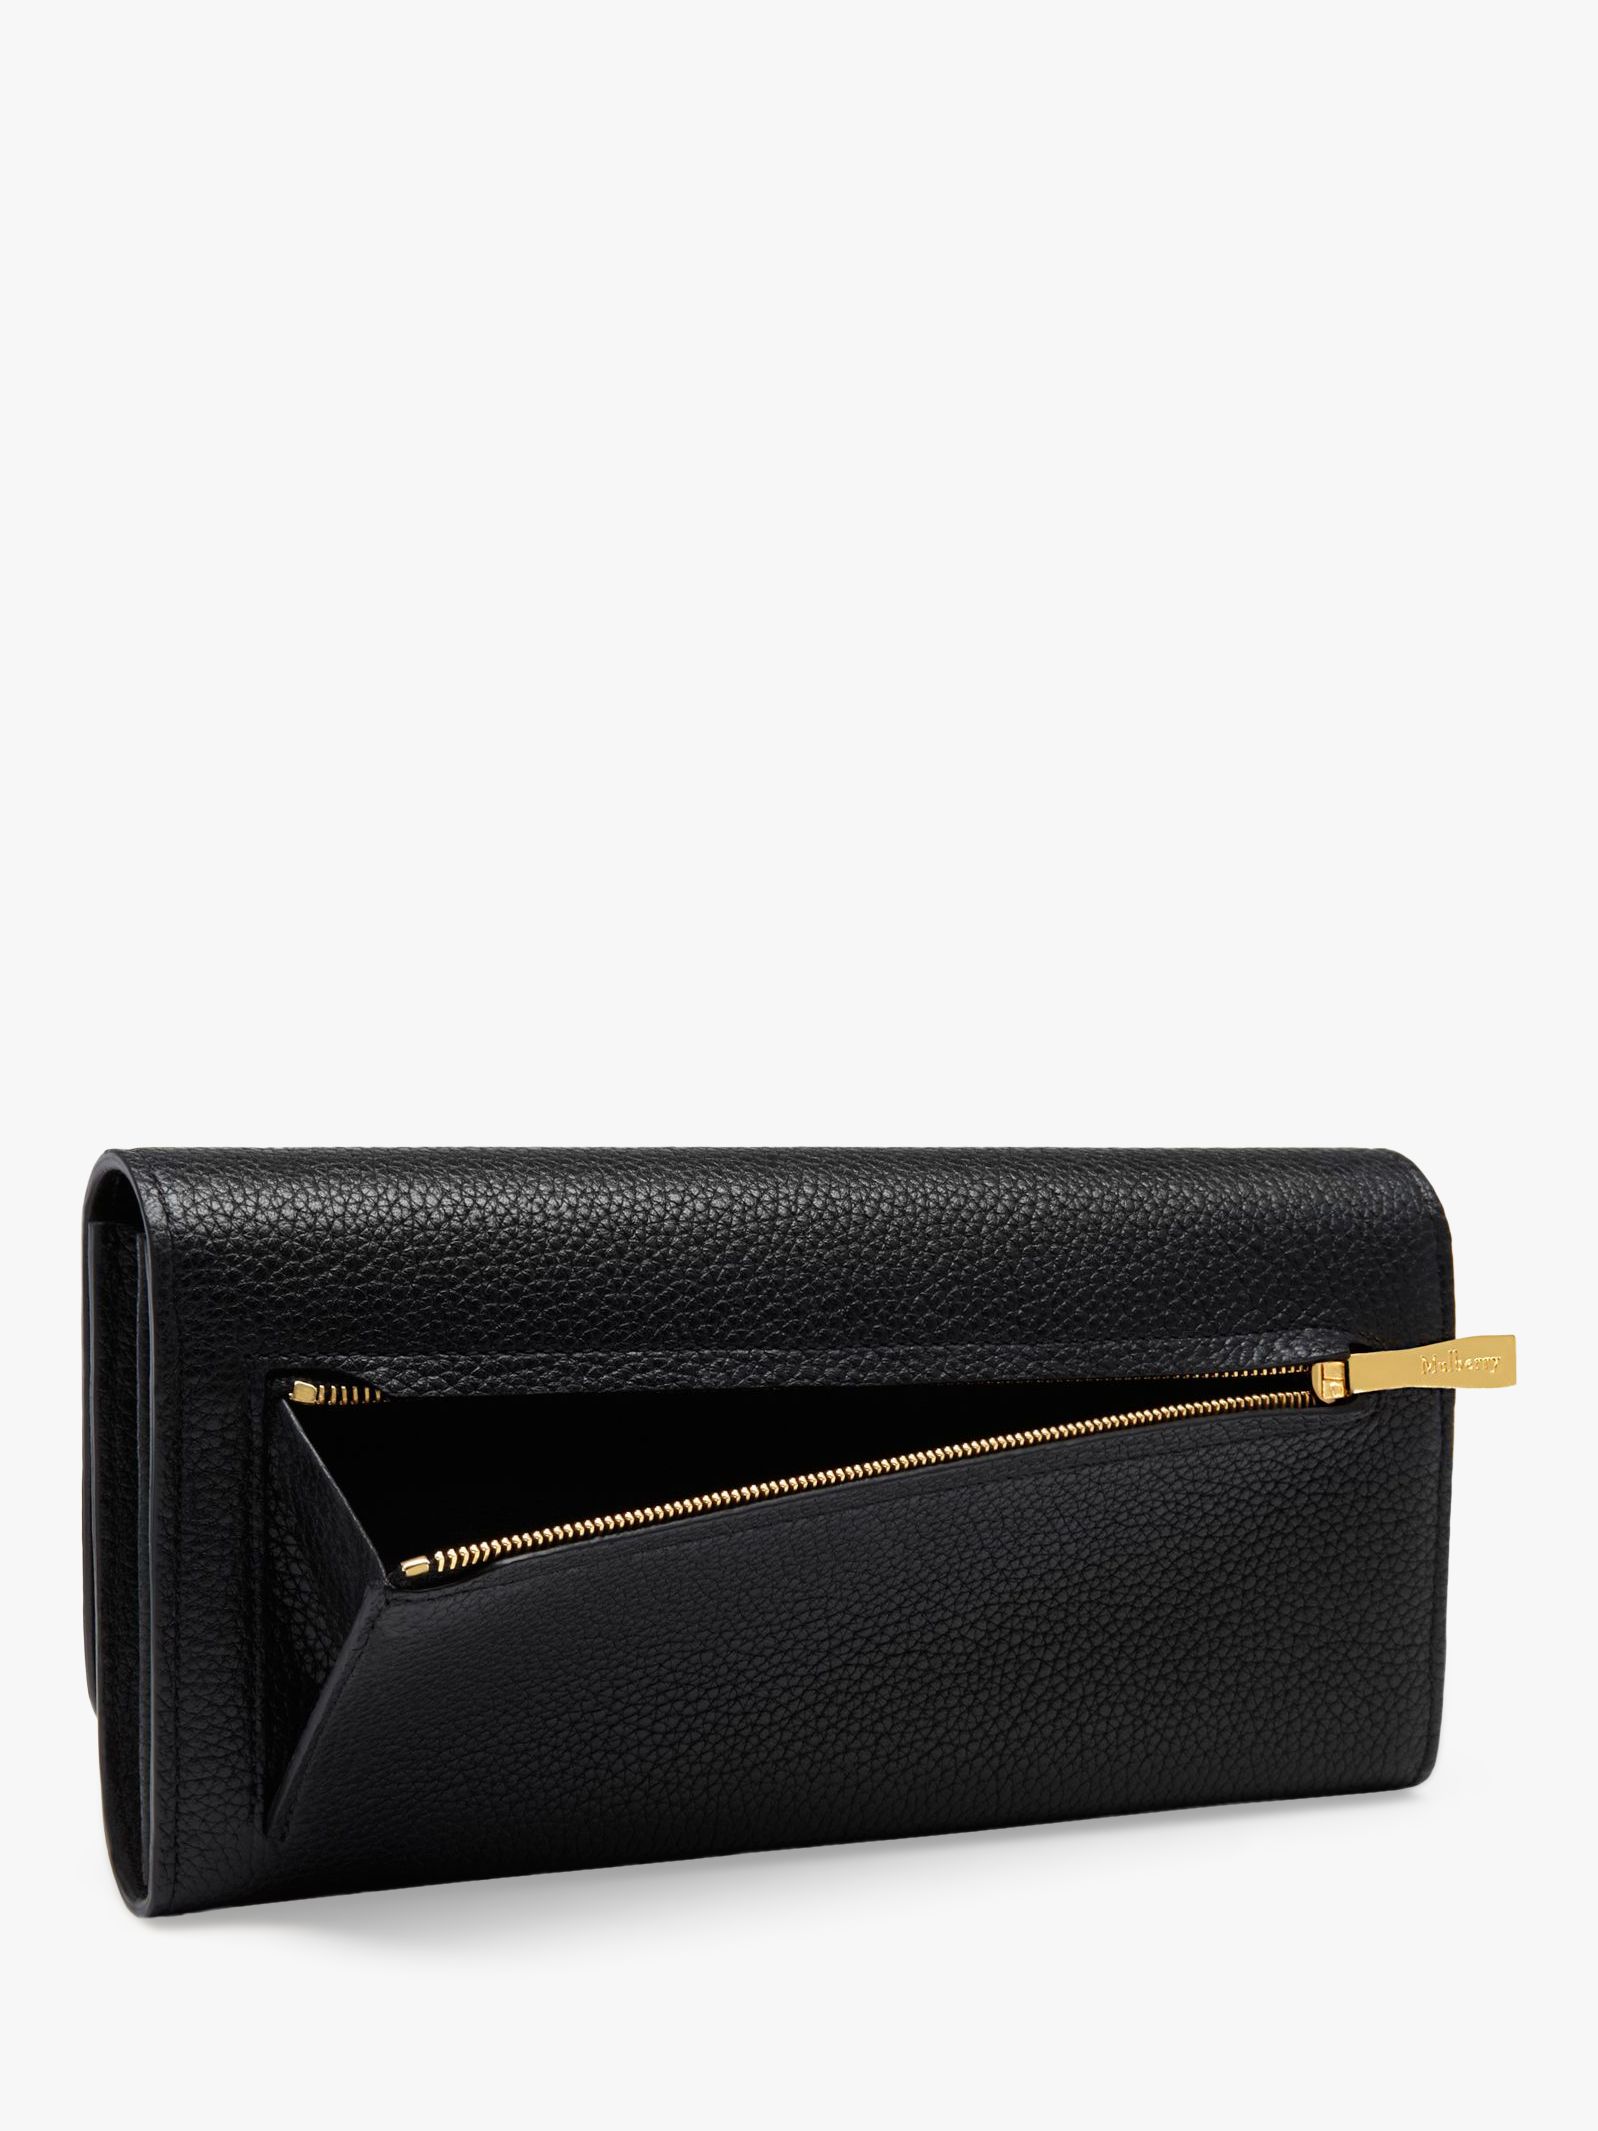 Mulberry Small Classic Grain Leather Continental Wallet, Black